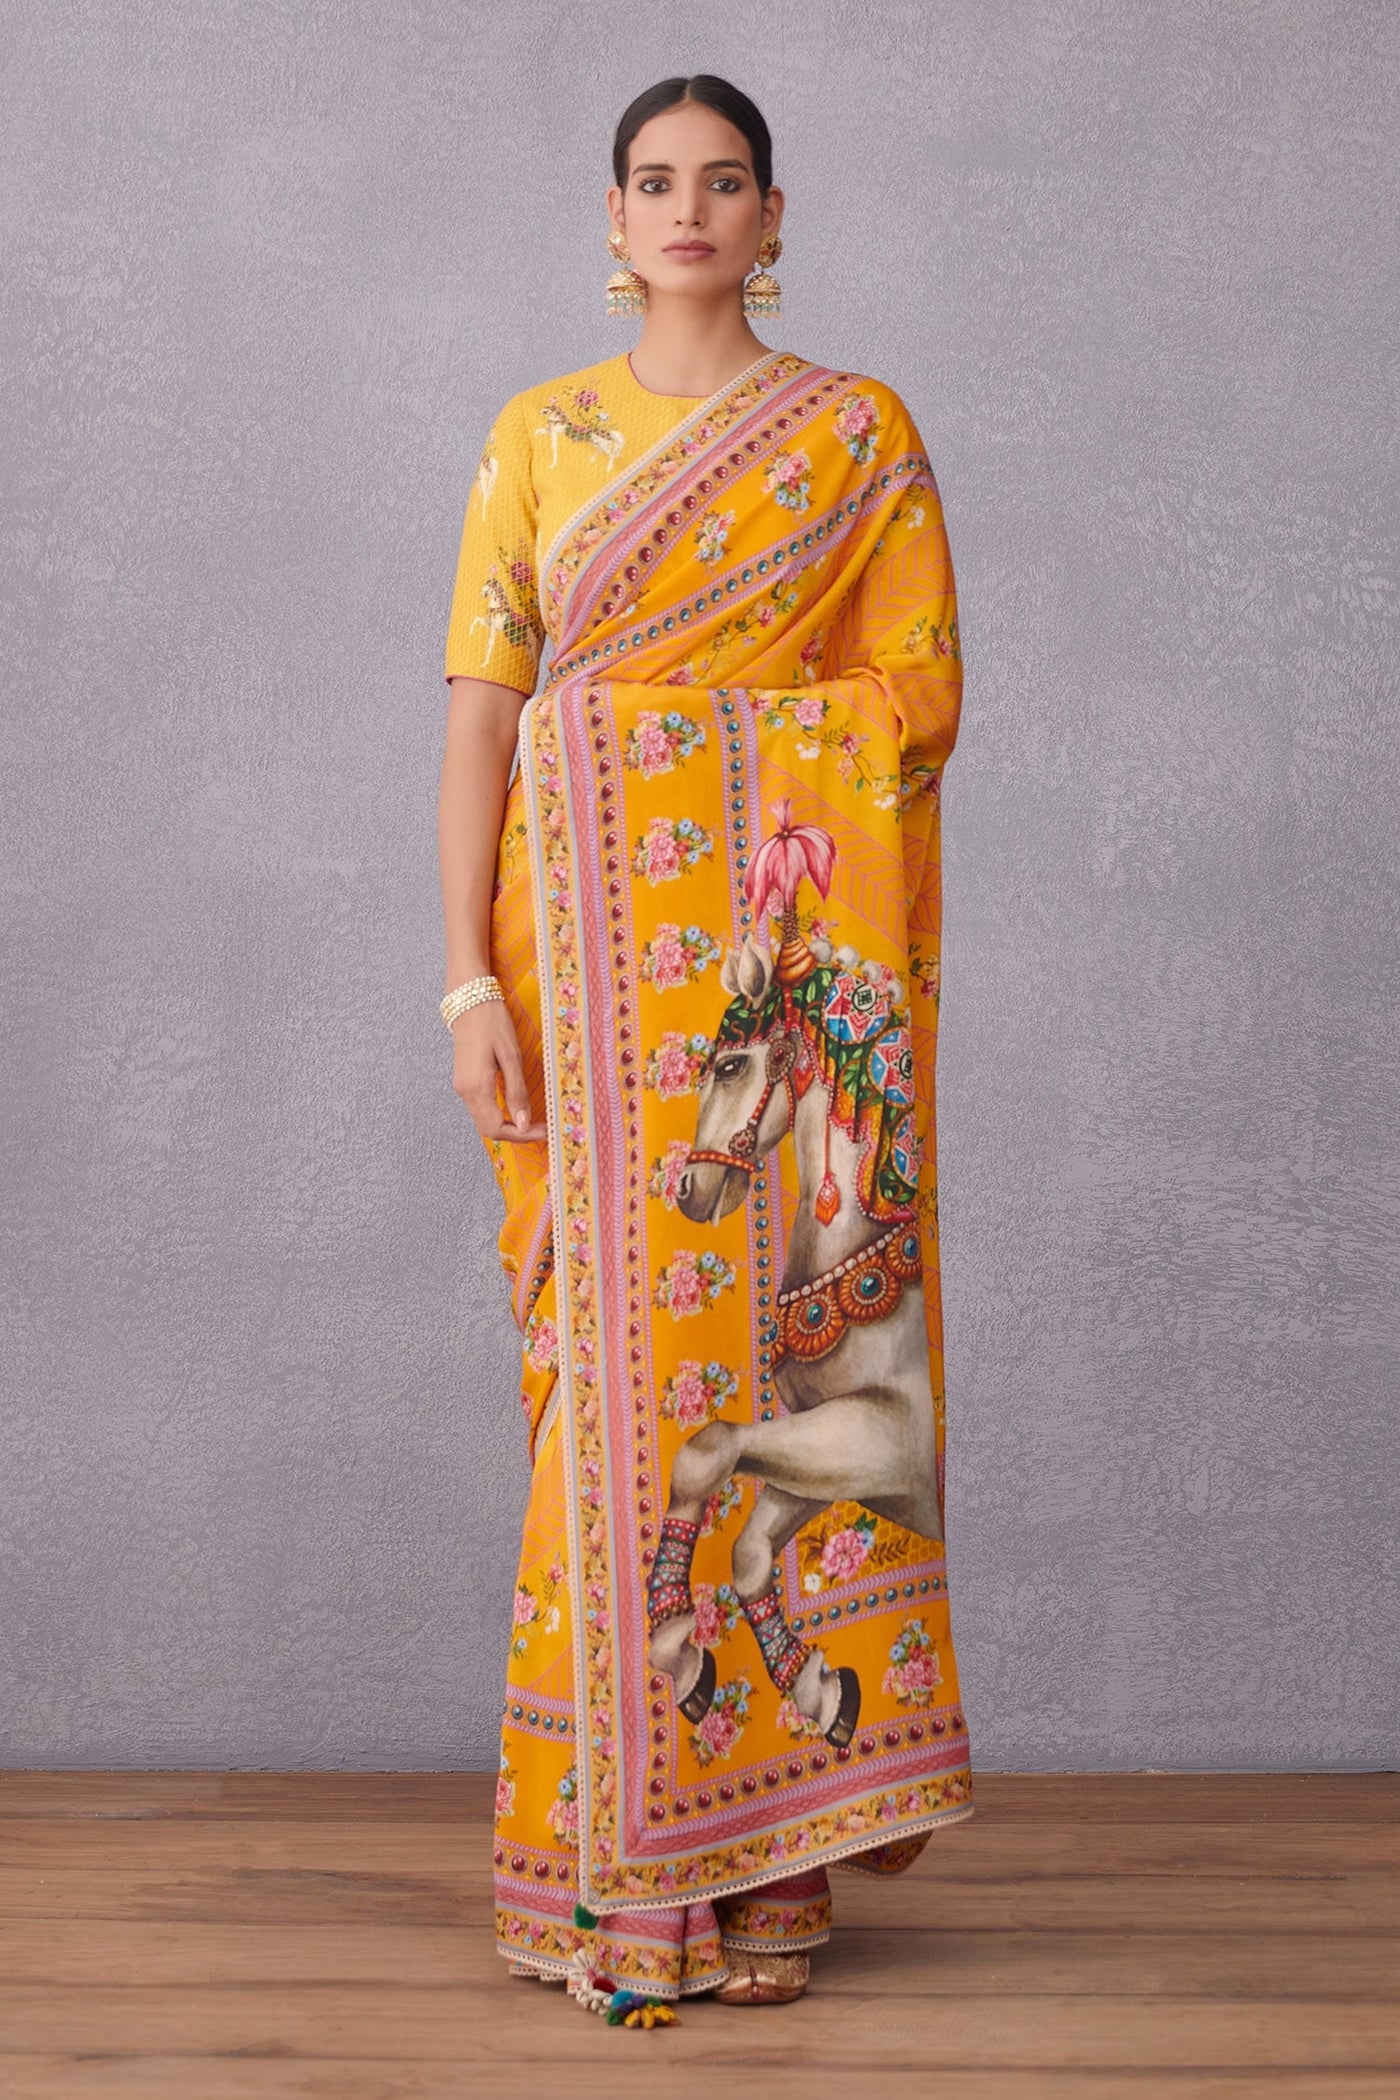 Sunehra Aashvani Saree - Indian Clothing in Denver, CO, Aurora, CO, Boulder, CO, Fort Collins, CO, Colorado Springs, CO, Parker, CO, Highlands Ranch, CO, Cherry Creek, CO, Centennial, CO, and Longmont, CO. Nationwide shipping USA - India Fashion X